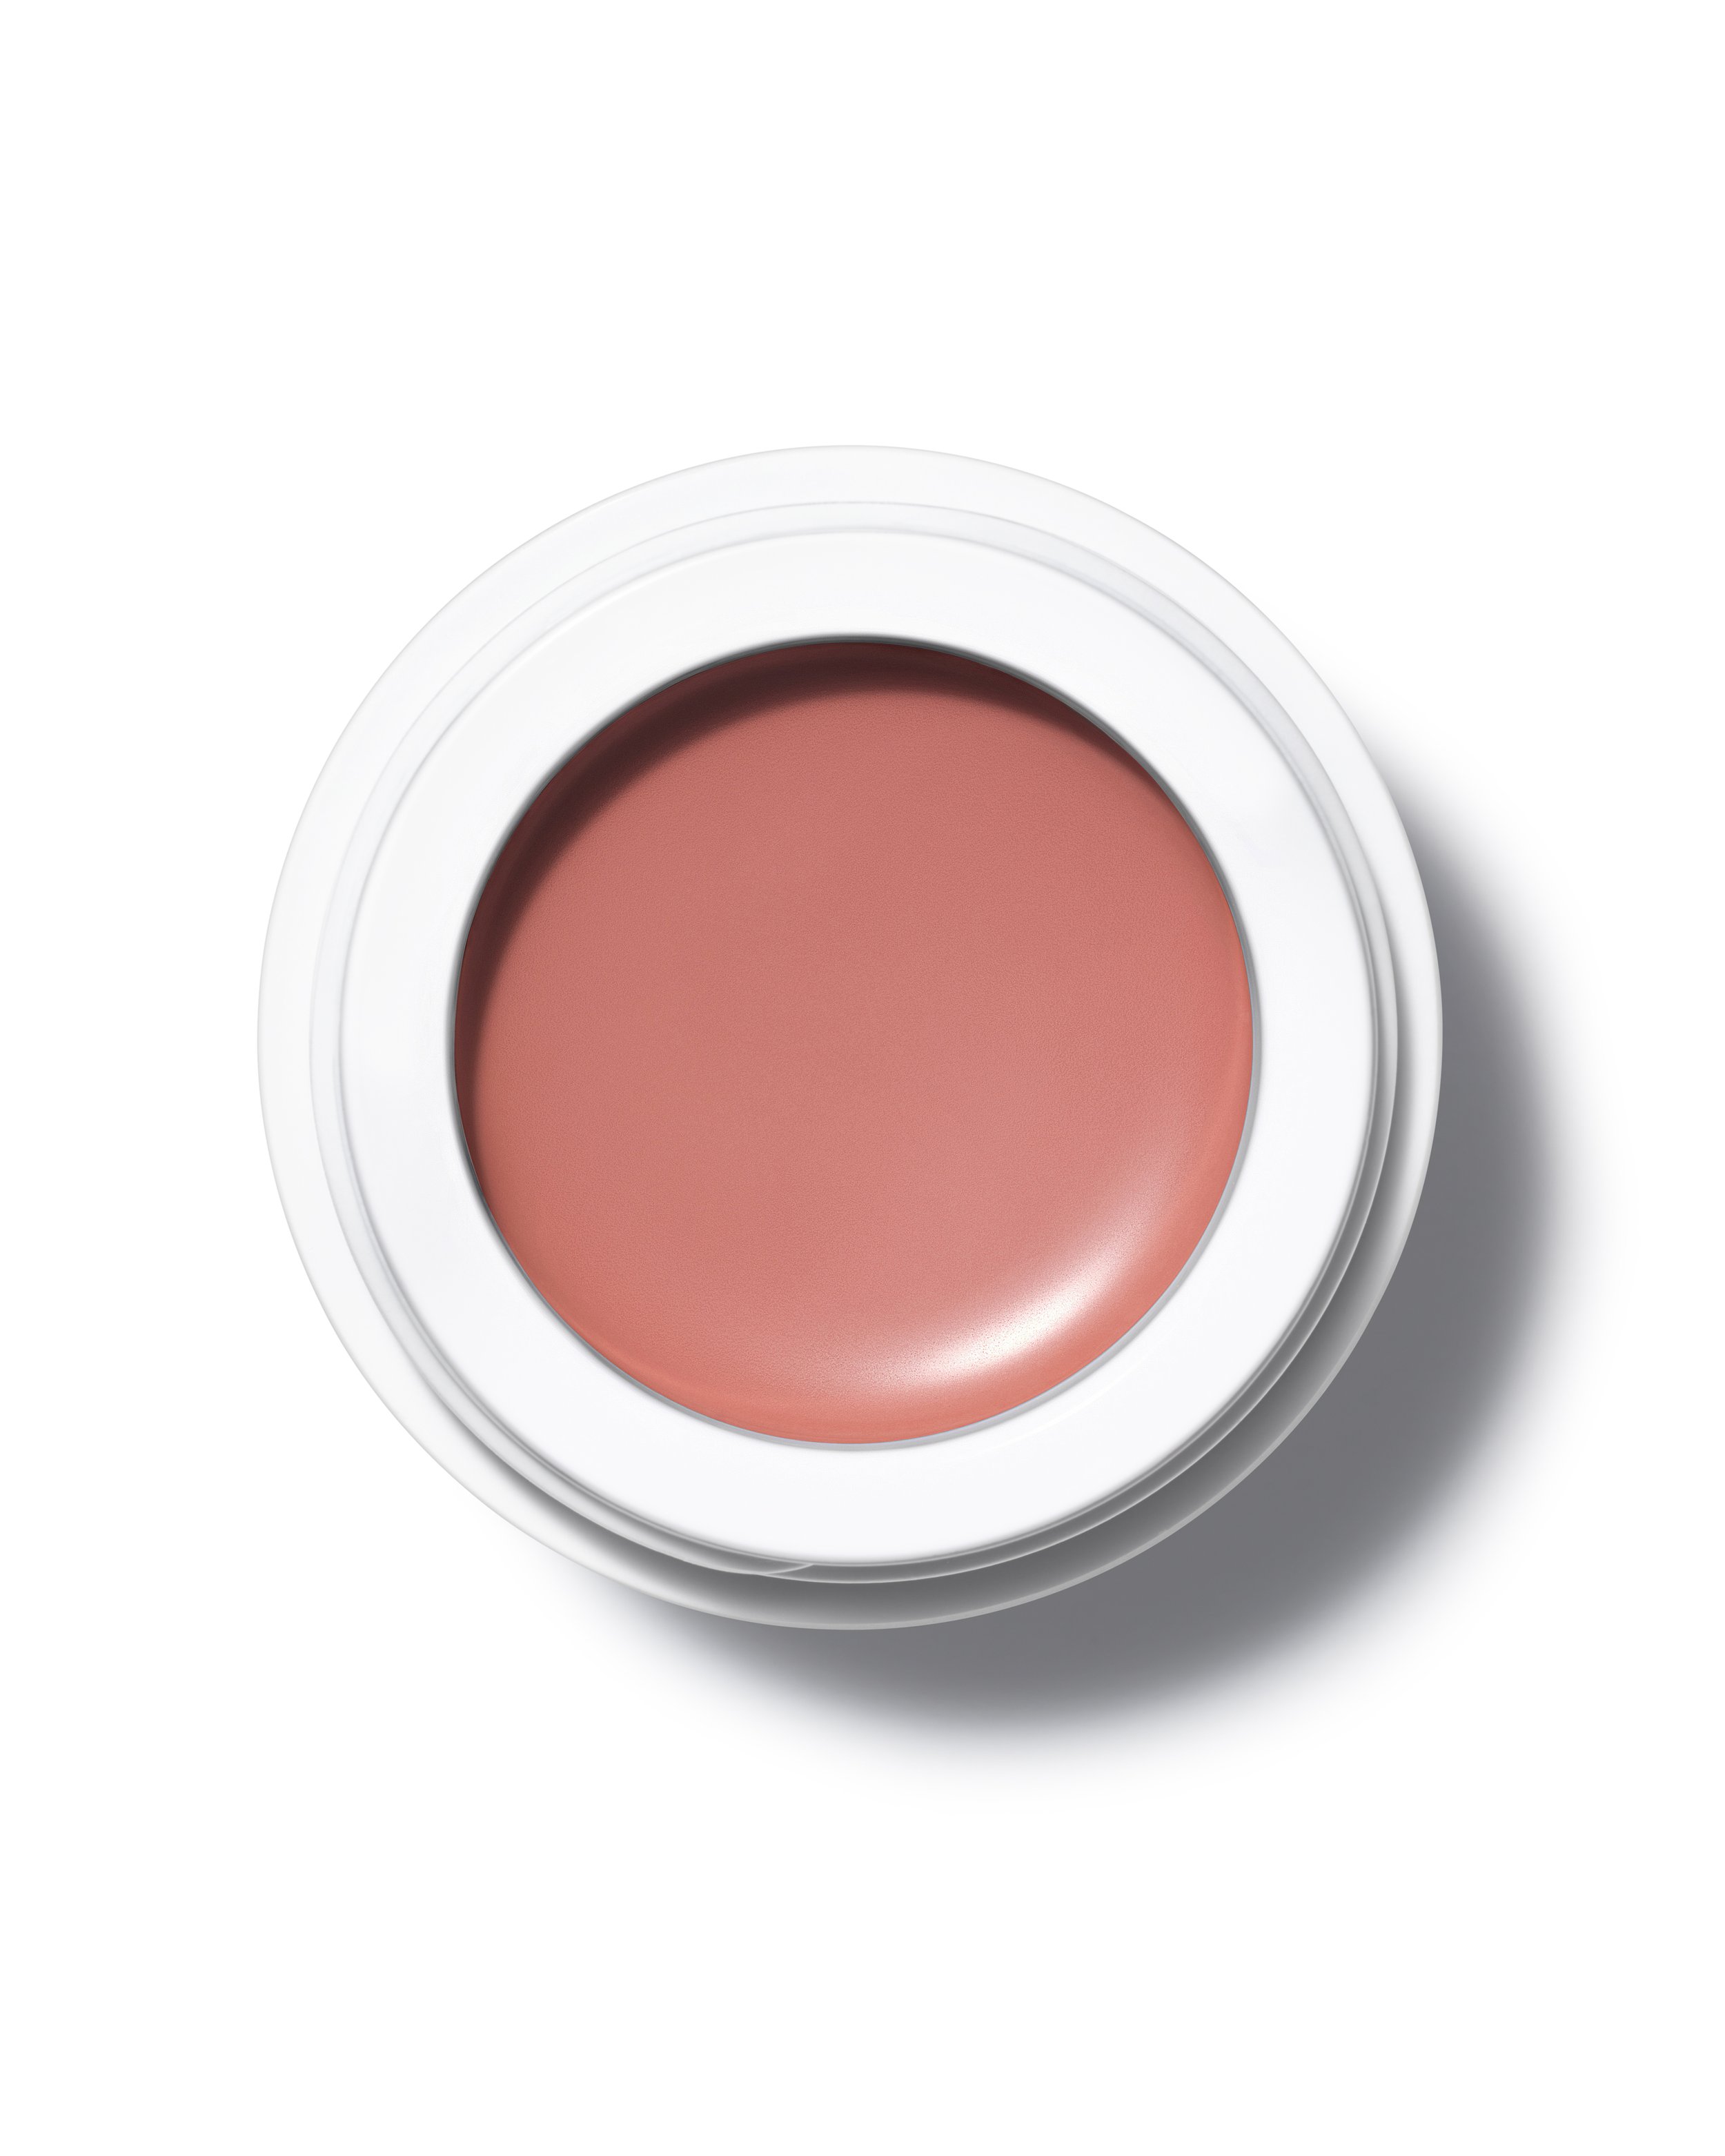 Bisque - Peachy-Beige with a Touch of Warmth